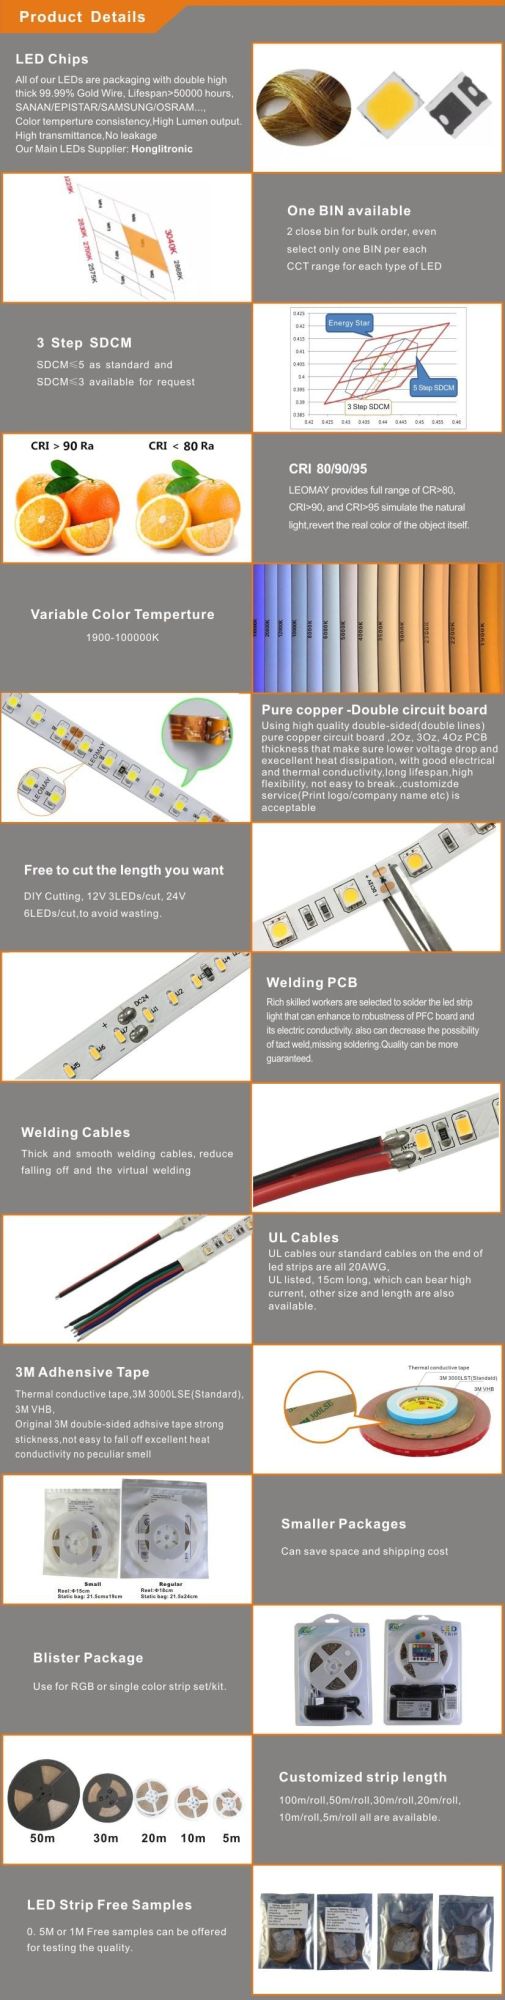 DC12V/24V 50meters One Roll SMD 2835 LED Flexible Strip Used for Decoration